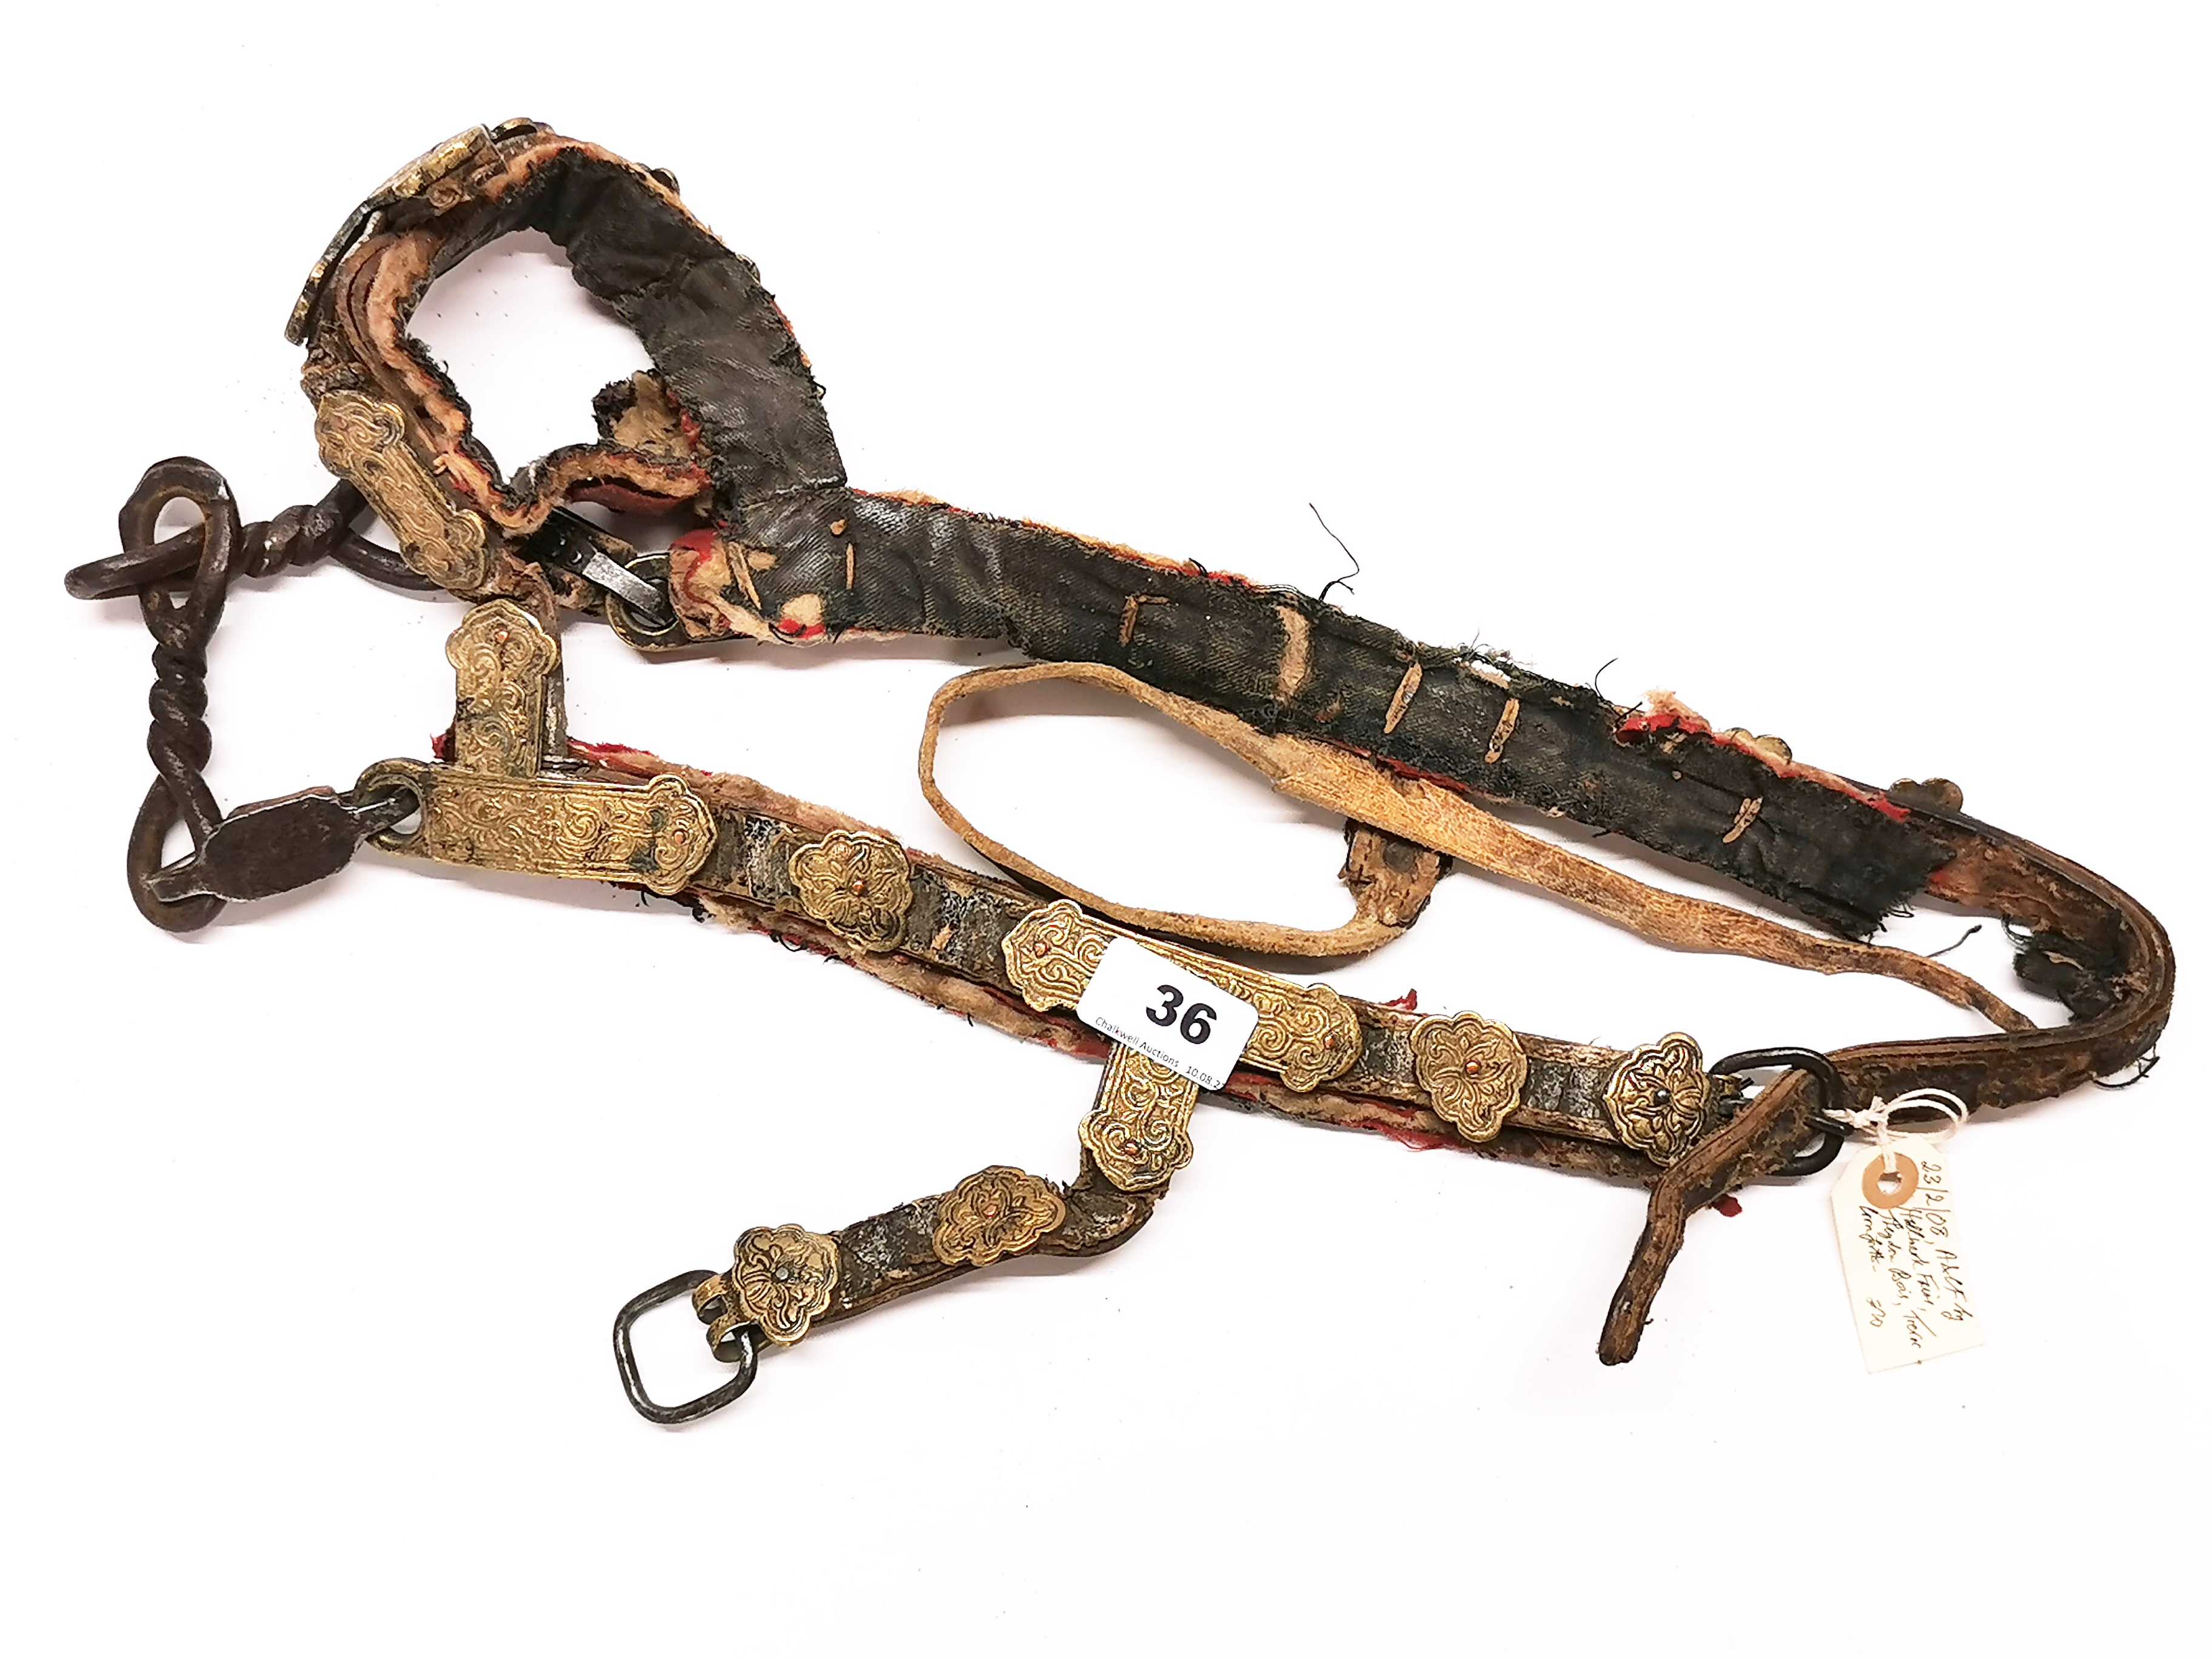 An early Tibetan steel and leather yak bridle. Prov. Estate of the late Dr. James (Jim) Bynon.